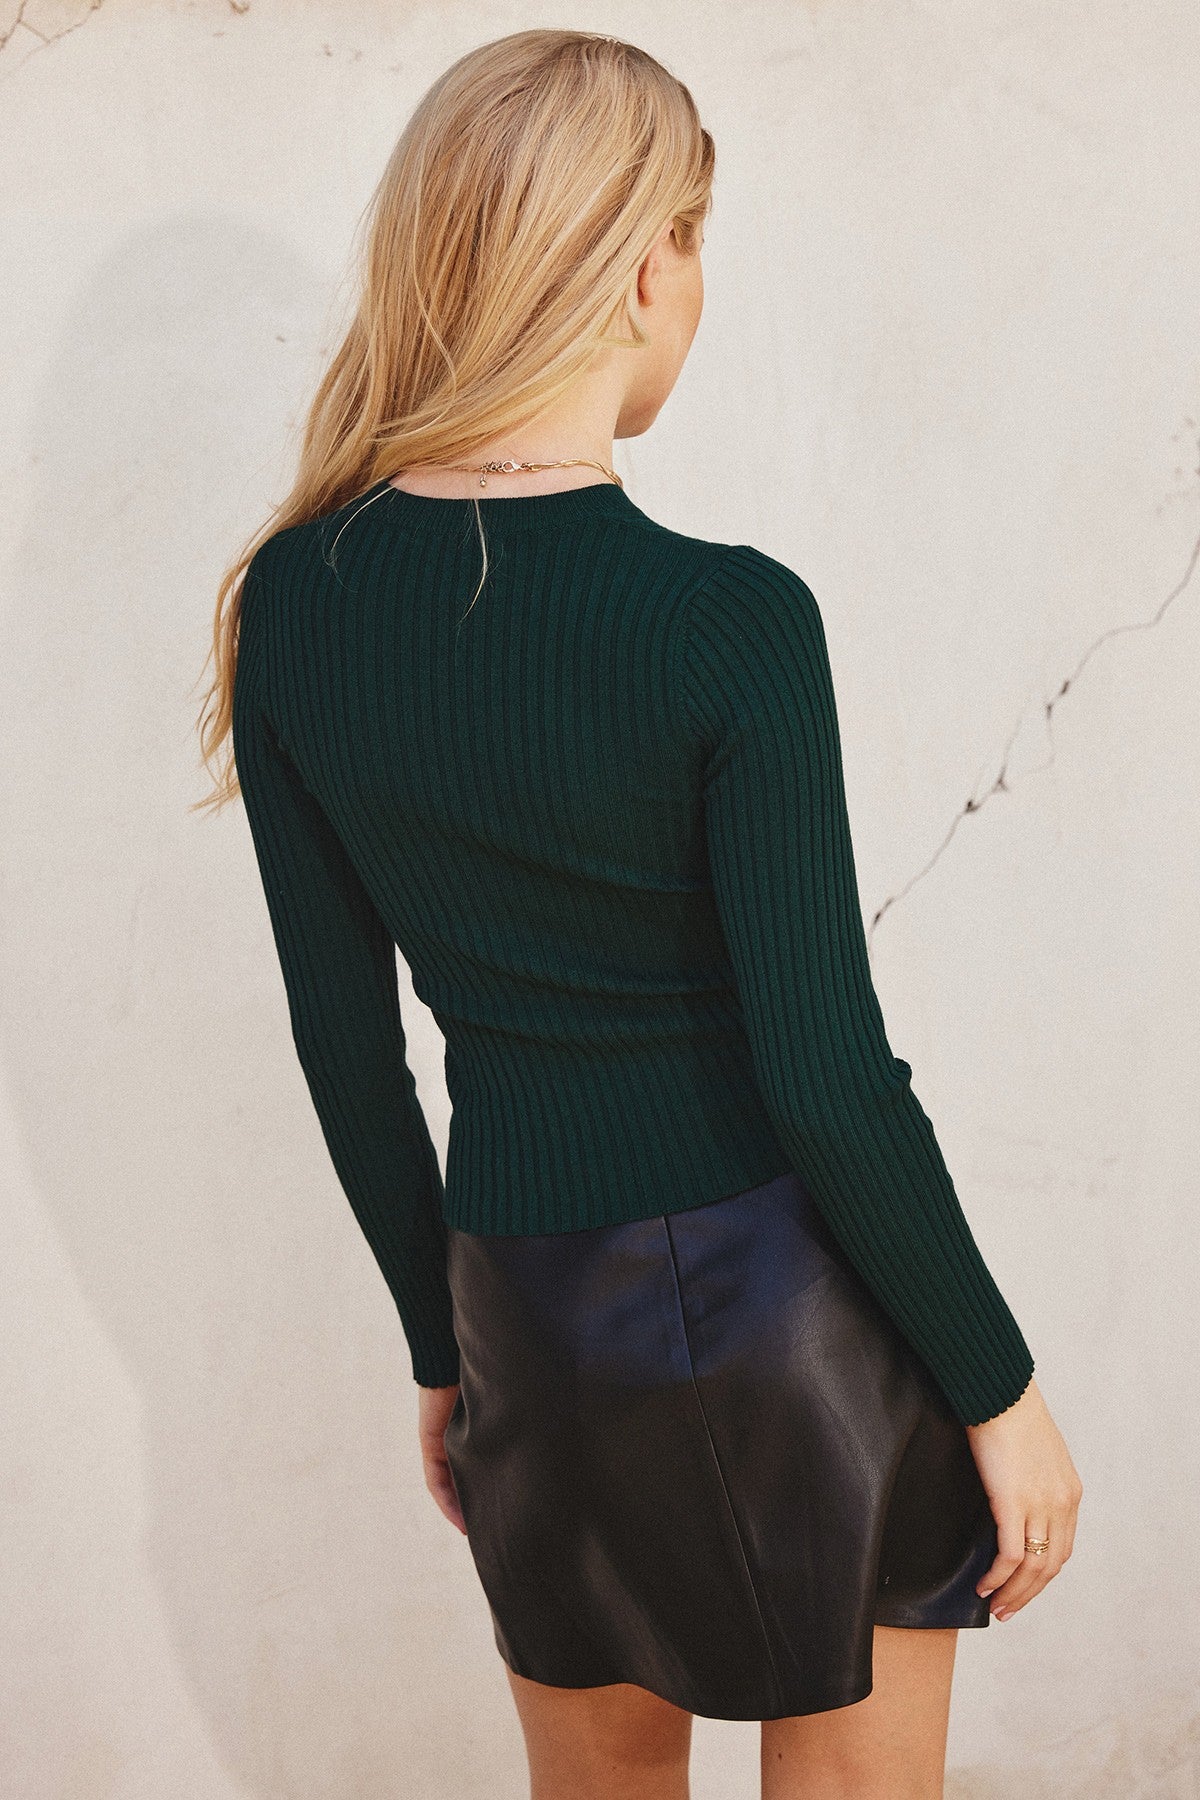 Dress Forum | Ribbed Knit Top in Emerald | Sweetest Stitch Boutique